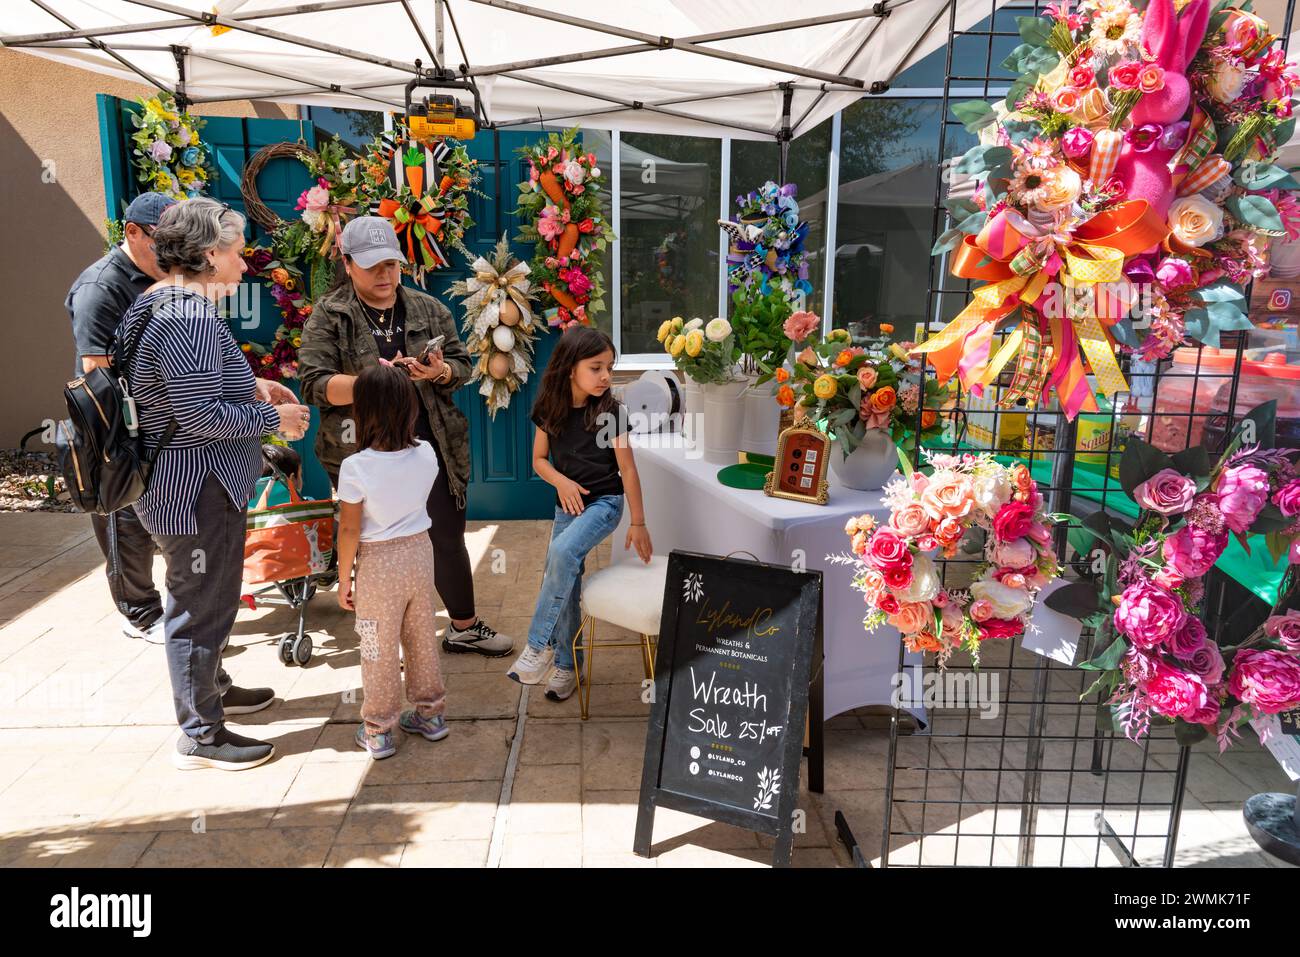 Shoppers with owner of lylandco, a small business that creates floral wreaths and home decor, South Texas Irish Fiesta, McAllen, Texas, USA. Stock Photo